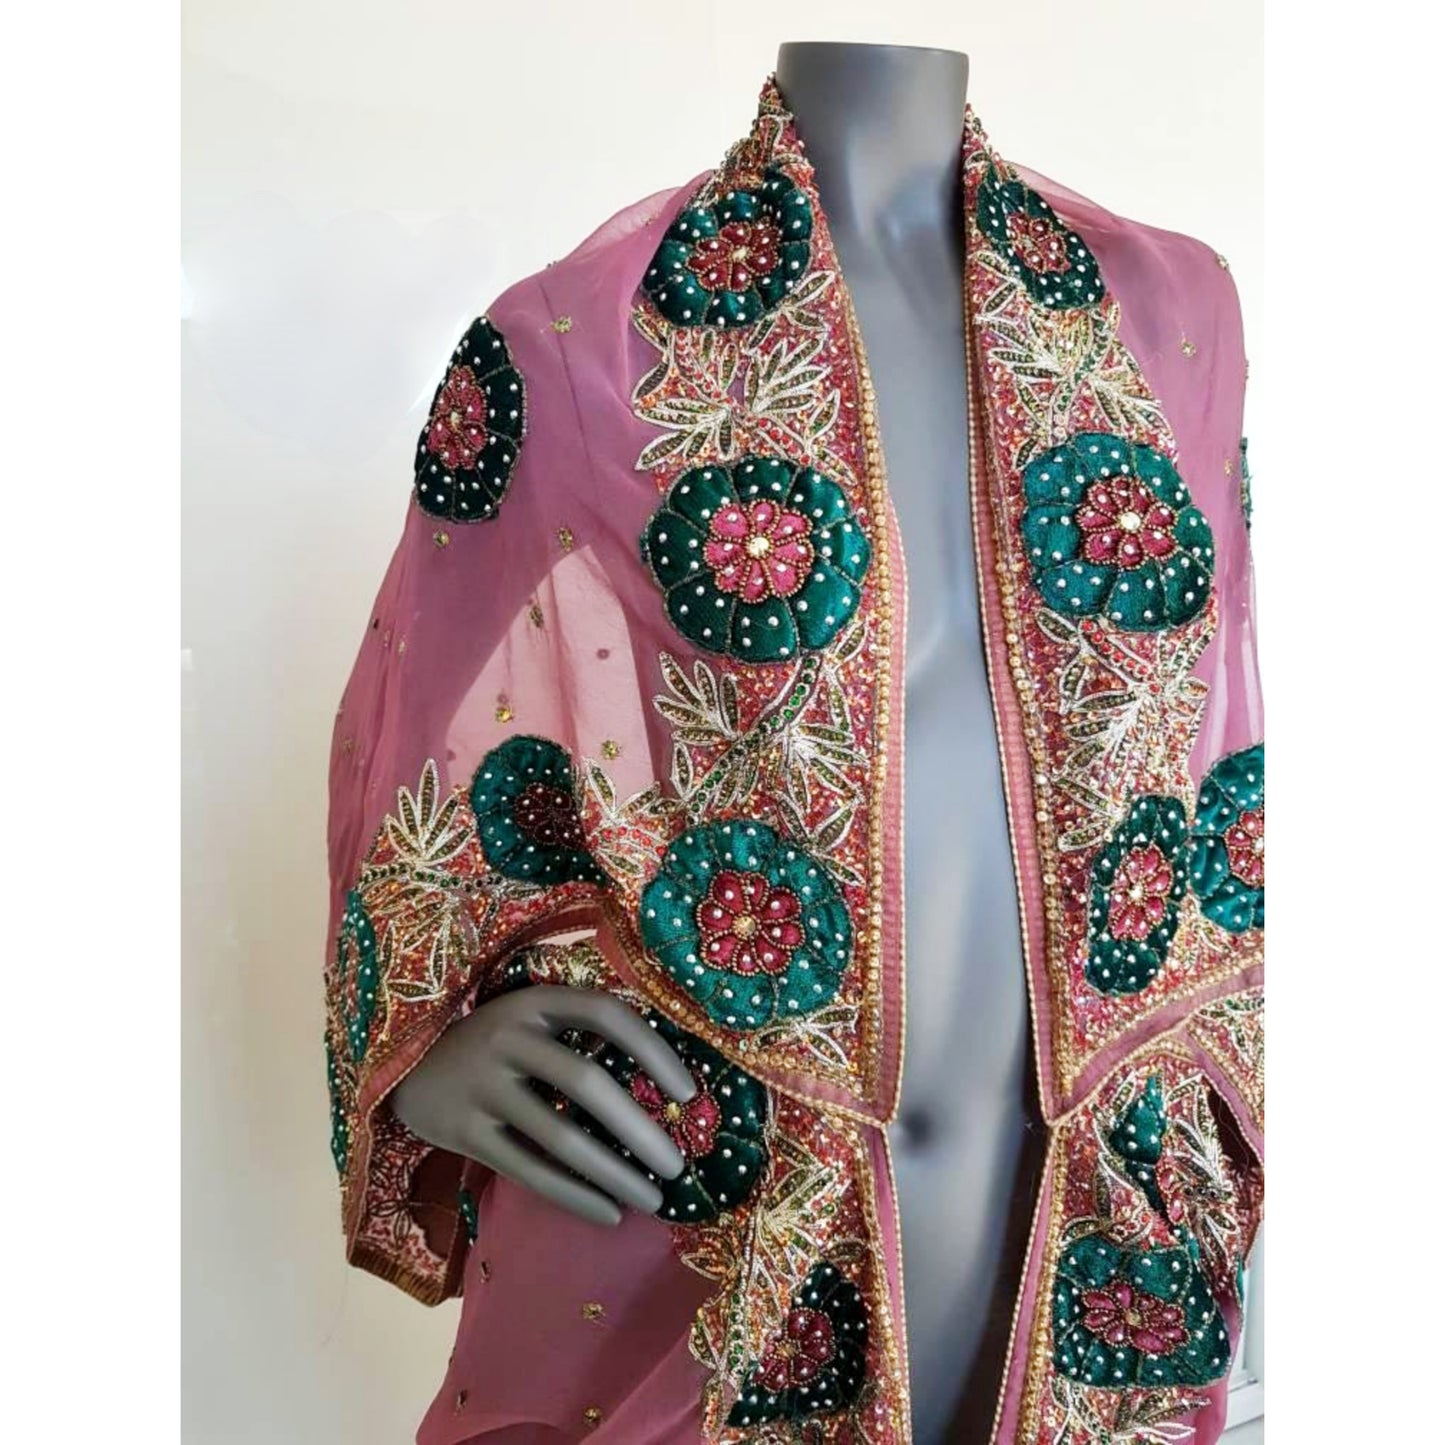 Luxurious semi sheer dusty pink draped kimono, beautifully hand embroidered with velvet appliques (XL)